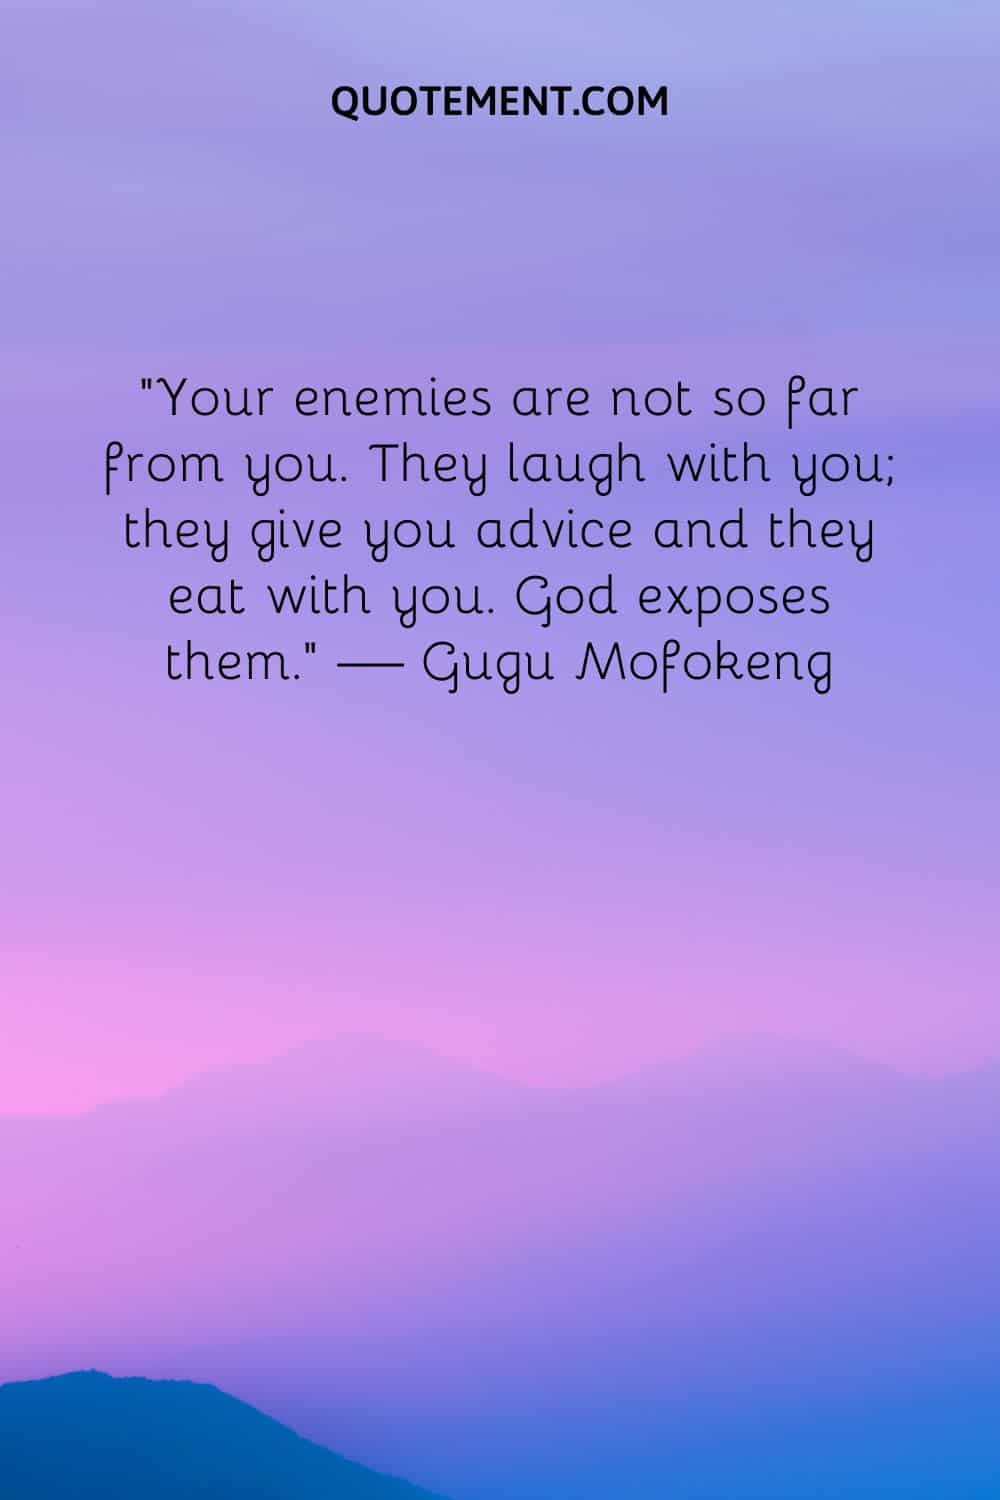 Your enemies are not so far from you